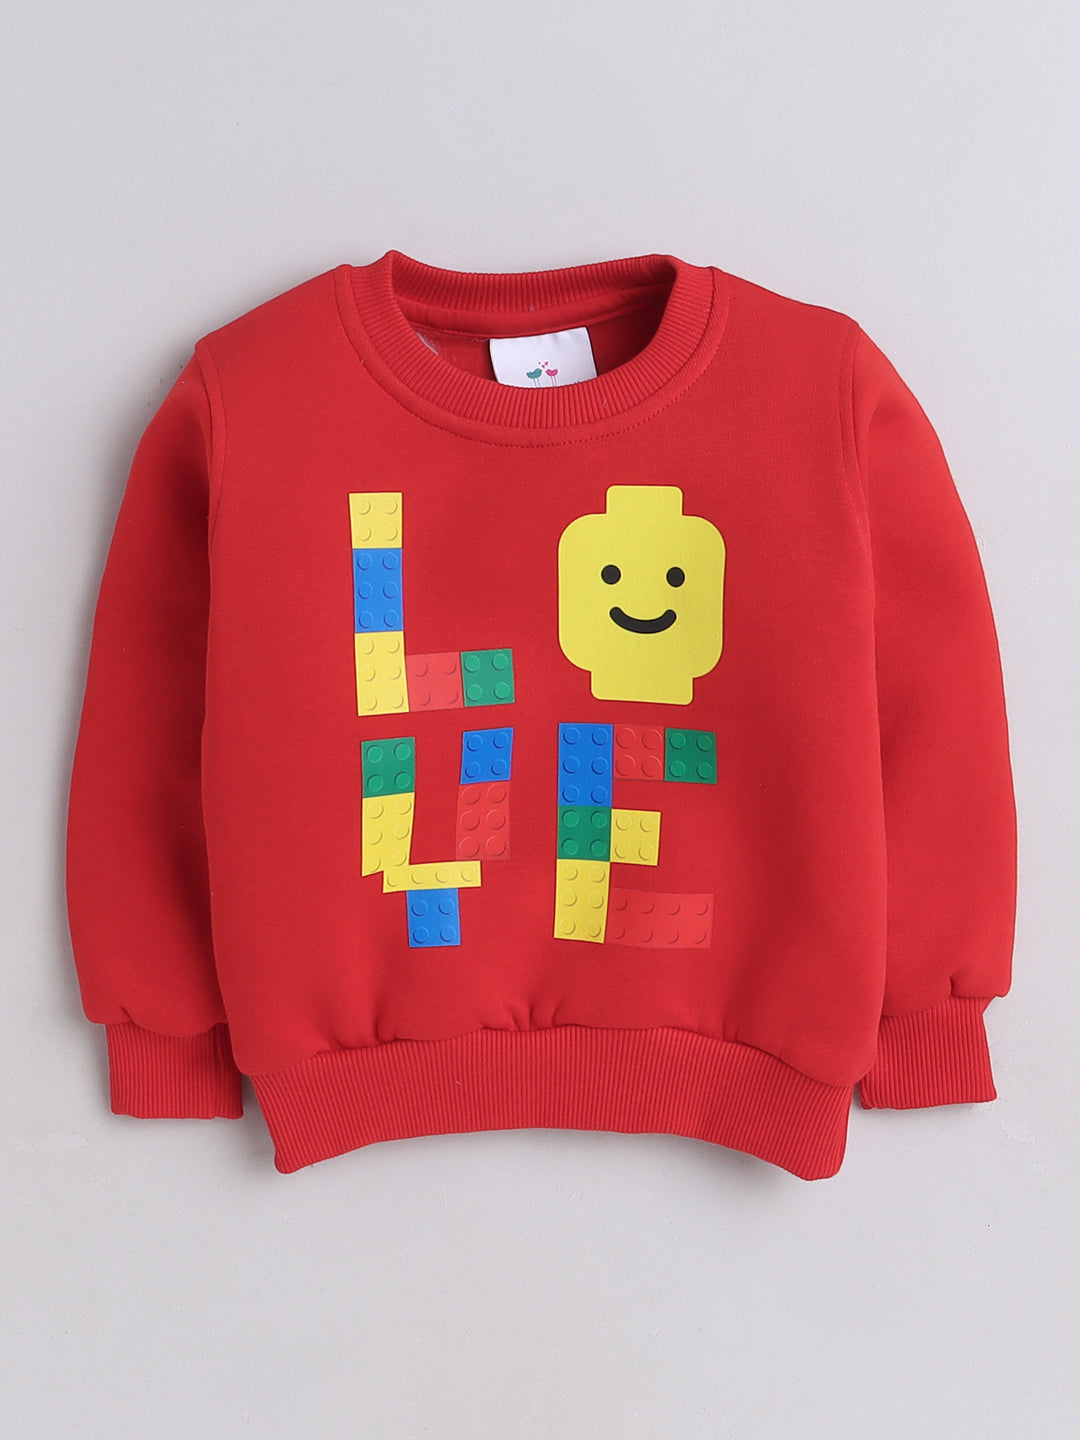 Knitting Doodles Kids' Sweat Shirt with Warm Fleece and Smart Love print- Red